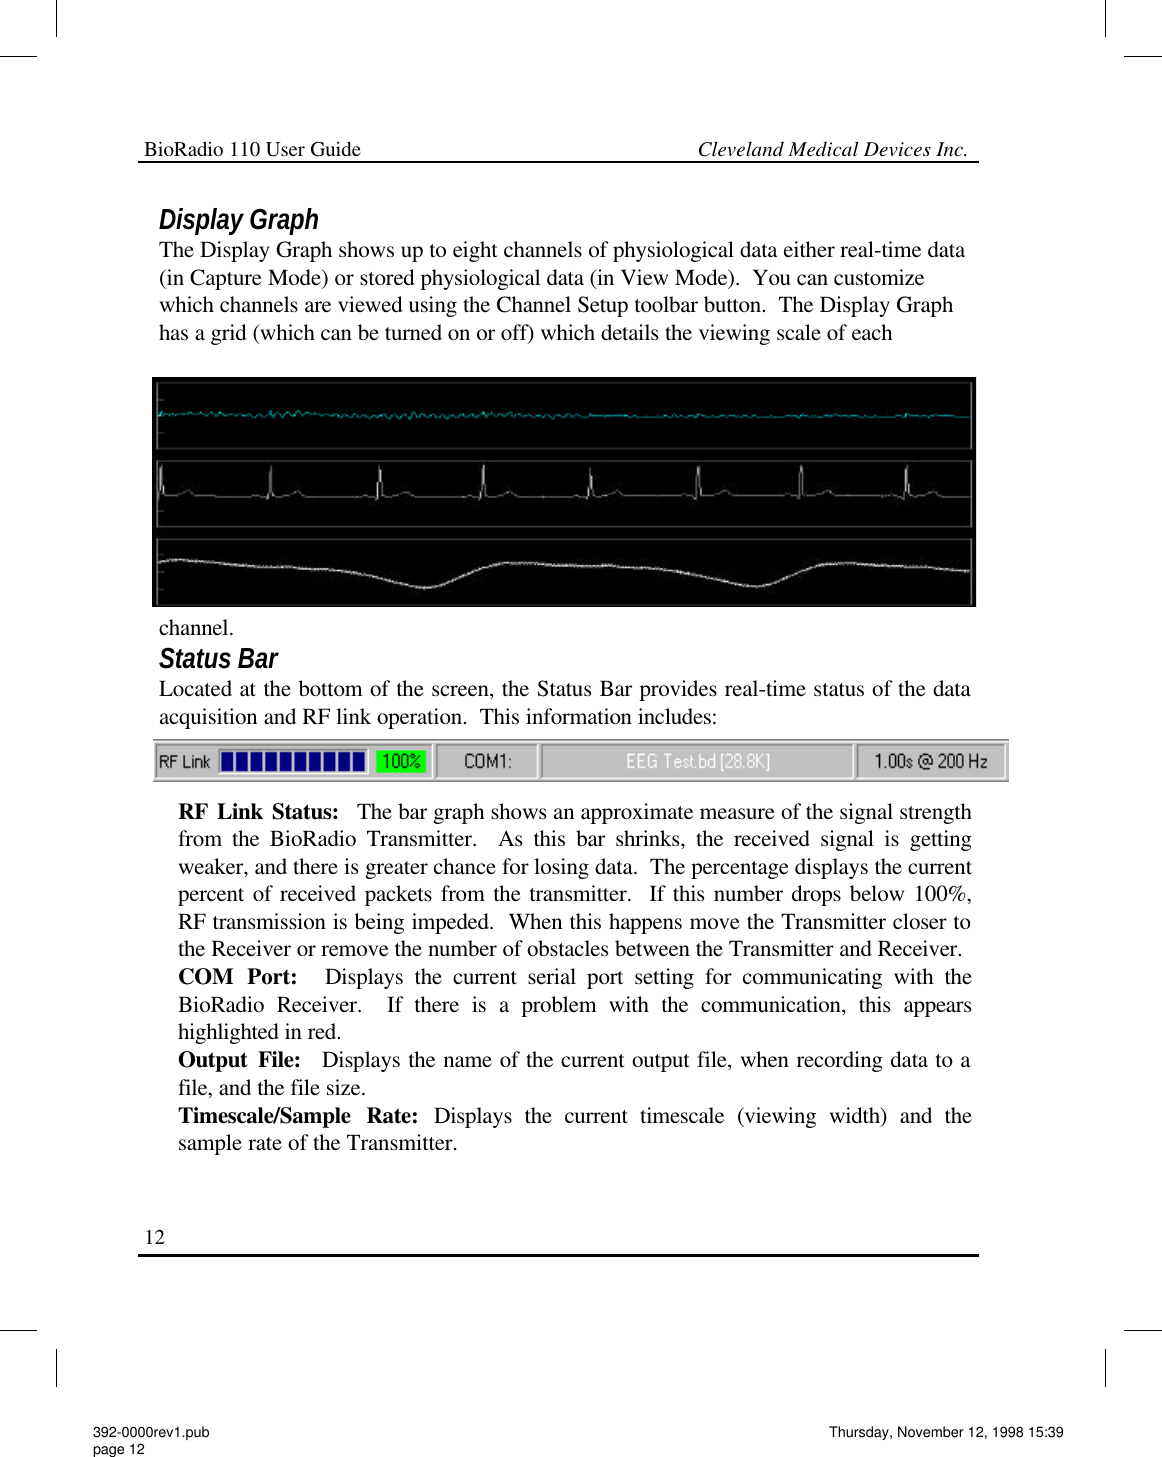 BioRadio 110 User Guide                                                             Cleveland Medical Devices Inc.12 Display Graph The Display Graph shows up to eight channels of physiological data either real-time data (in Capture Mode) or stored physiological data (in View Mode).  You can customize which channels are viewed using the Channel Setup toolbar button.  The Display Graph has a grid (which can be turned on or off) which details the viewing scale of each channel. Status Bar Located at the bottom of the screen, the Status Bar provides real-time status of the data acquisition and RF link operation.  This information includes: RF Link Status:  The bar graph shows an approximate measure of the signal strength from the BioRadio Transmitter.  As this bar shrinks, the received signal is getting weaker, and there is greater chance for losing data.  The percentage displays the current percent of received packets from the transmitter.  If this number drops below 100%, RF transmission is being impeded.  When this happens move the Transmitter closer to the Receiver or remove the number of obstacles between the Transmitter and Receiver. COM Port:  Displays the current serial port setting for communicating with the BioRadio Receiver.  If there is a problem with the communication, this appears highlighted in red. Output File:  Displays the name of the current output file, when recording data to a file, and the file size. Timescale/Sample Rate: Displays the current timescale (viewing width) and the sample rate of the Transmitter. 392-0000rev1.pub page 12 Thursday, November 12, 1998 15:39 